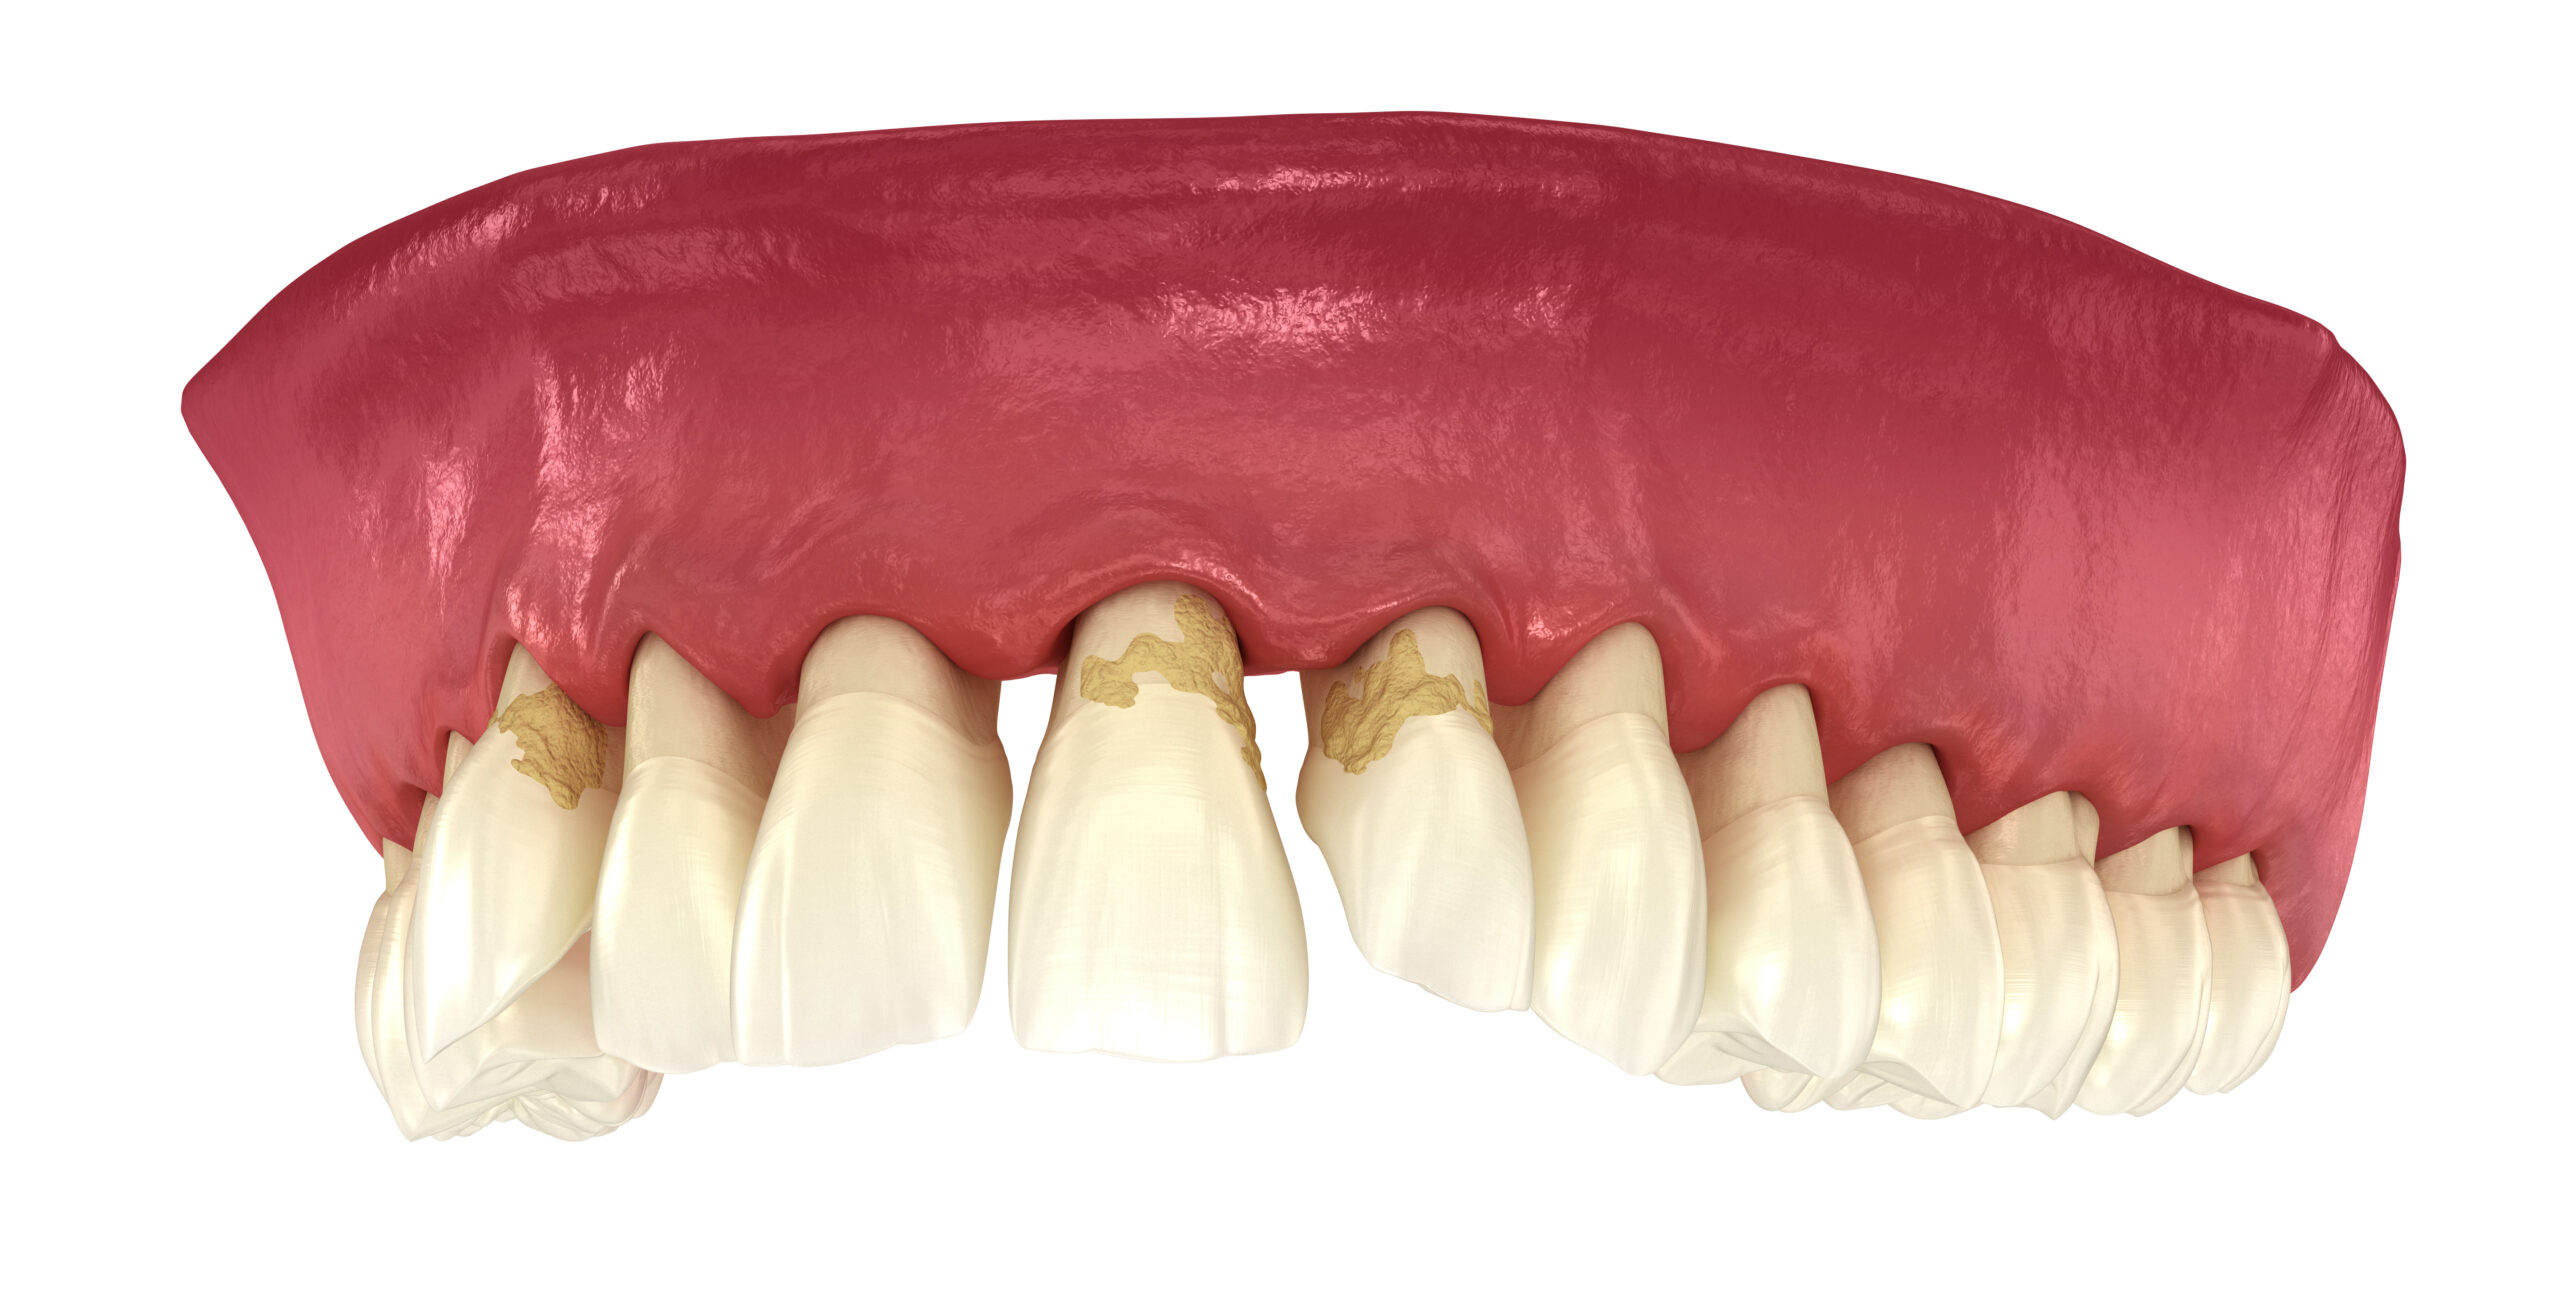 Periodontitis and gum recession. Medically accurate 3D illustration.